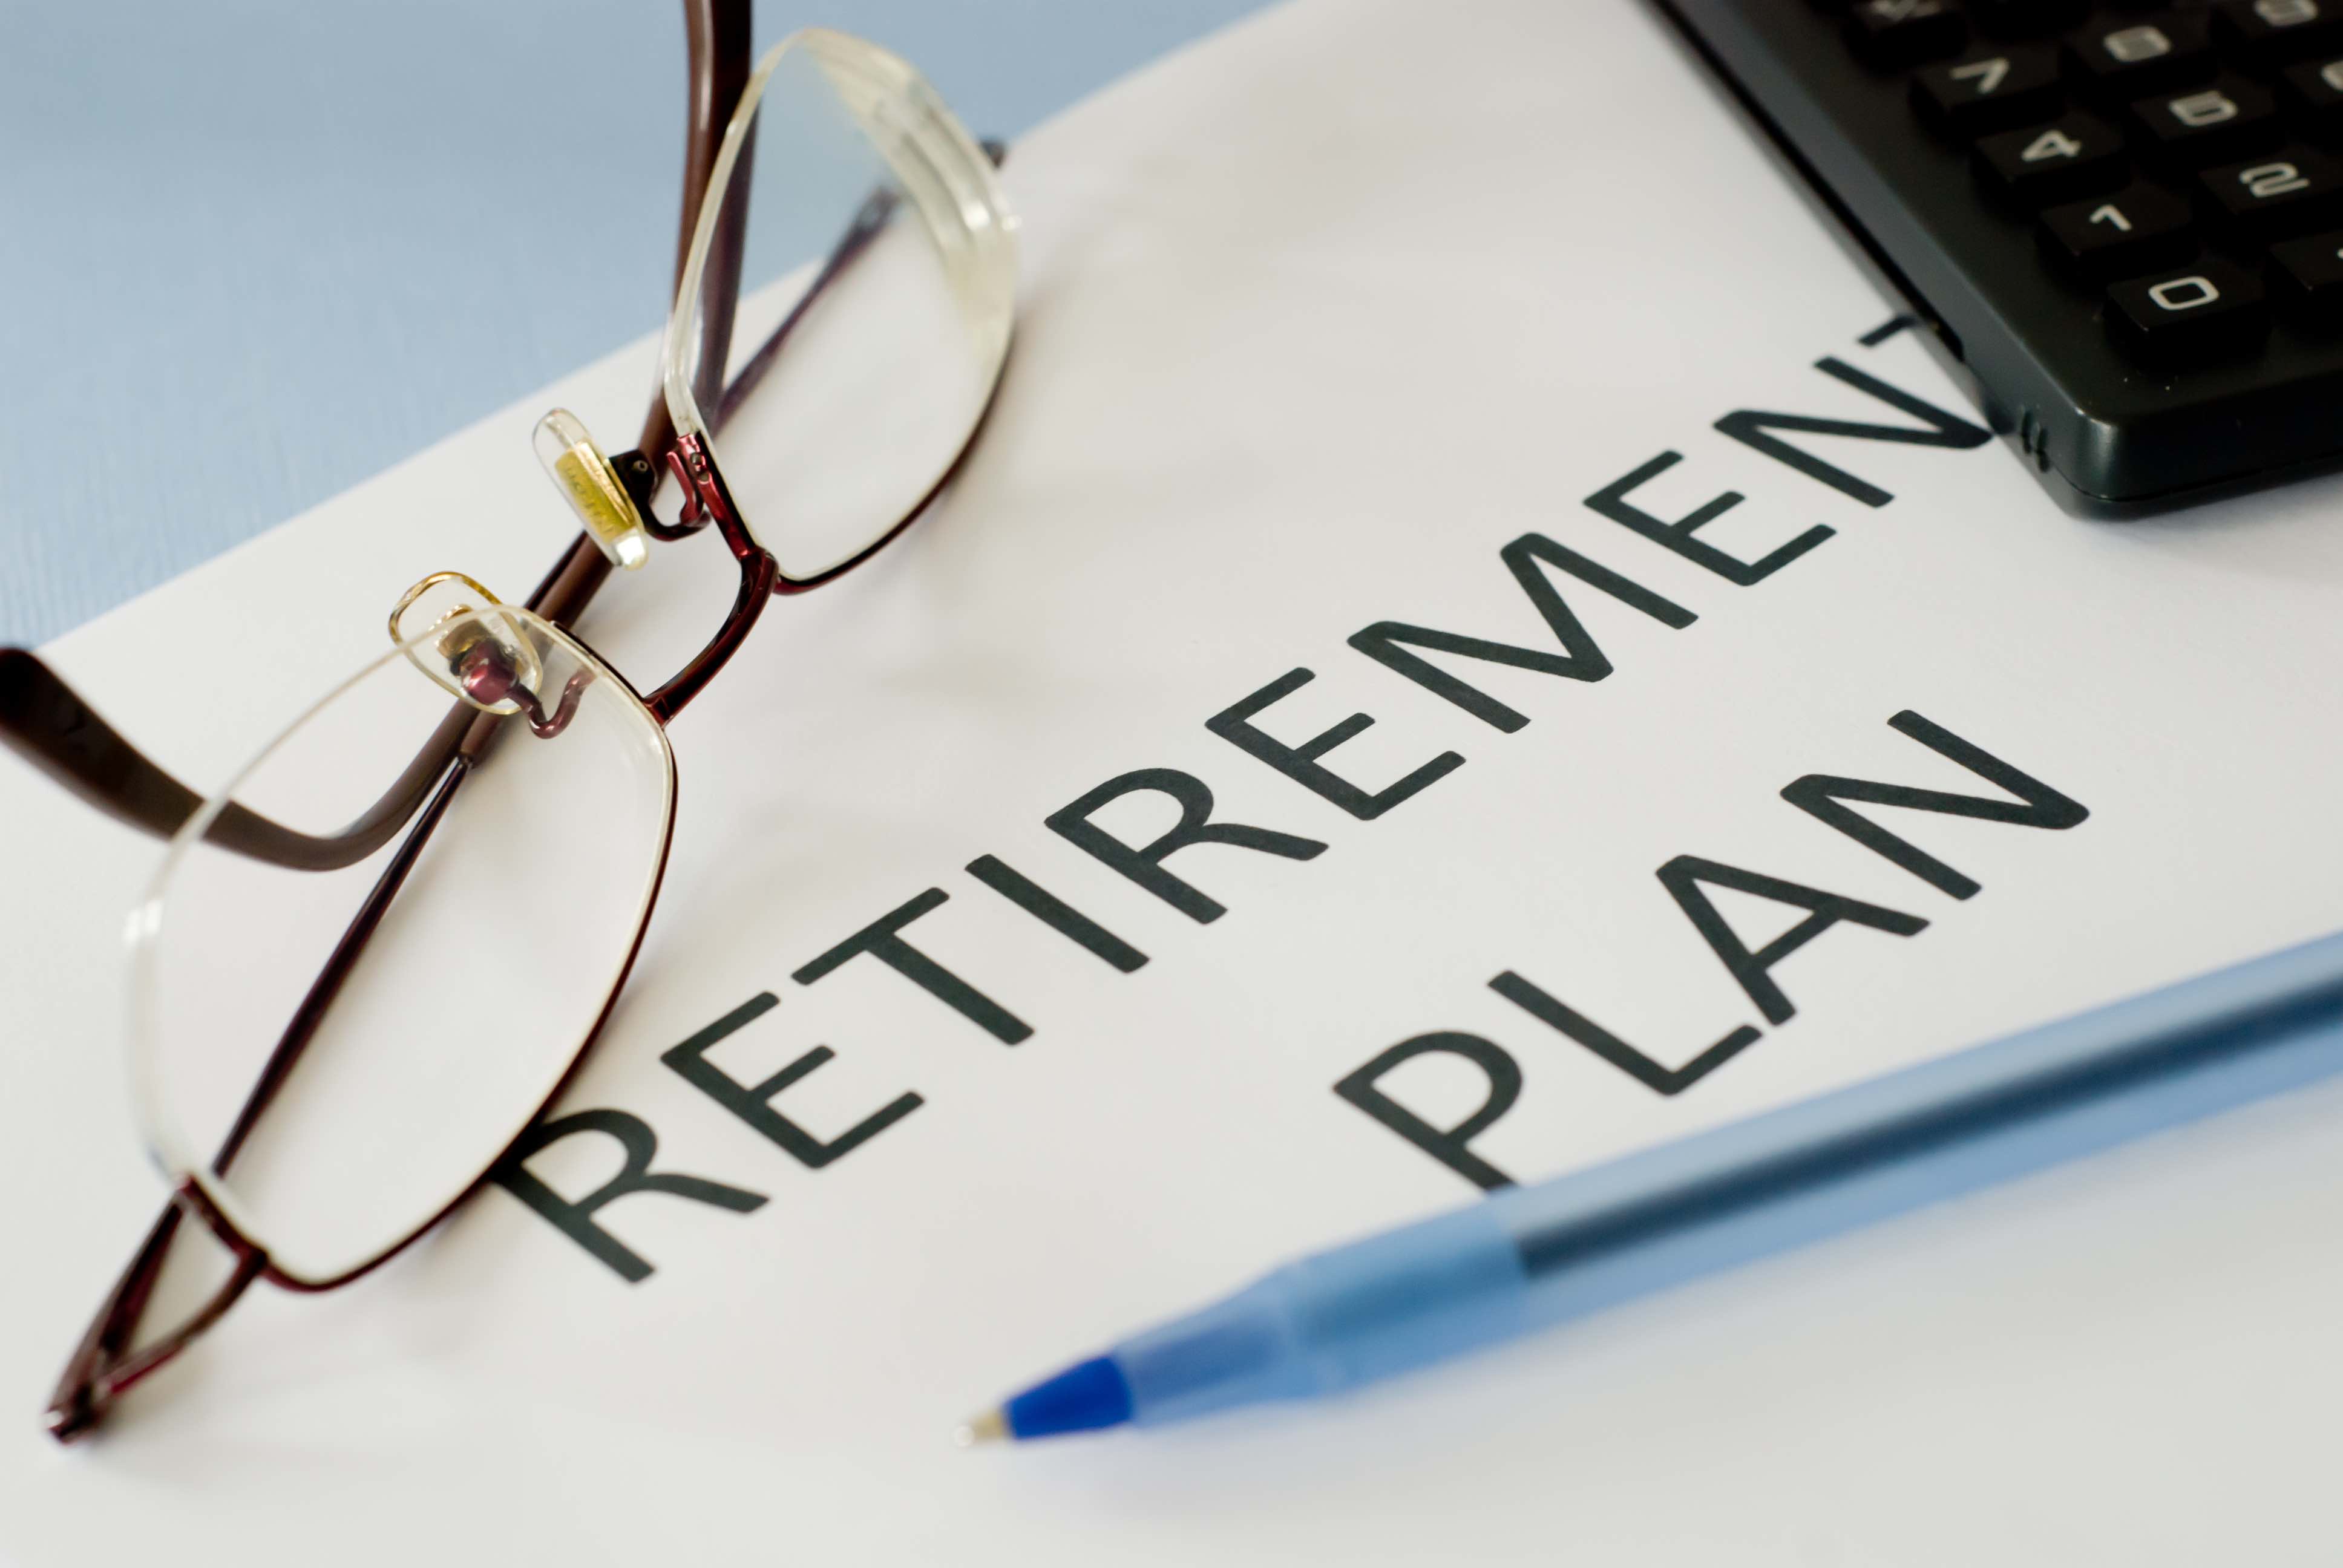 pension reforms and retirement plans